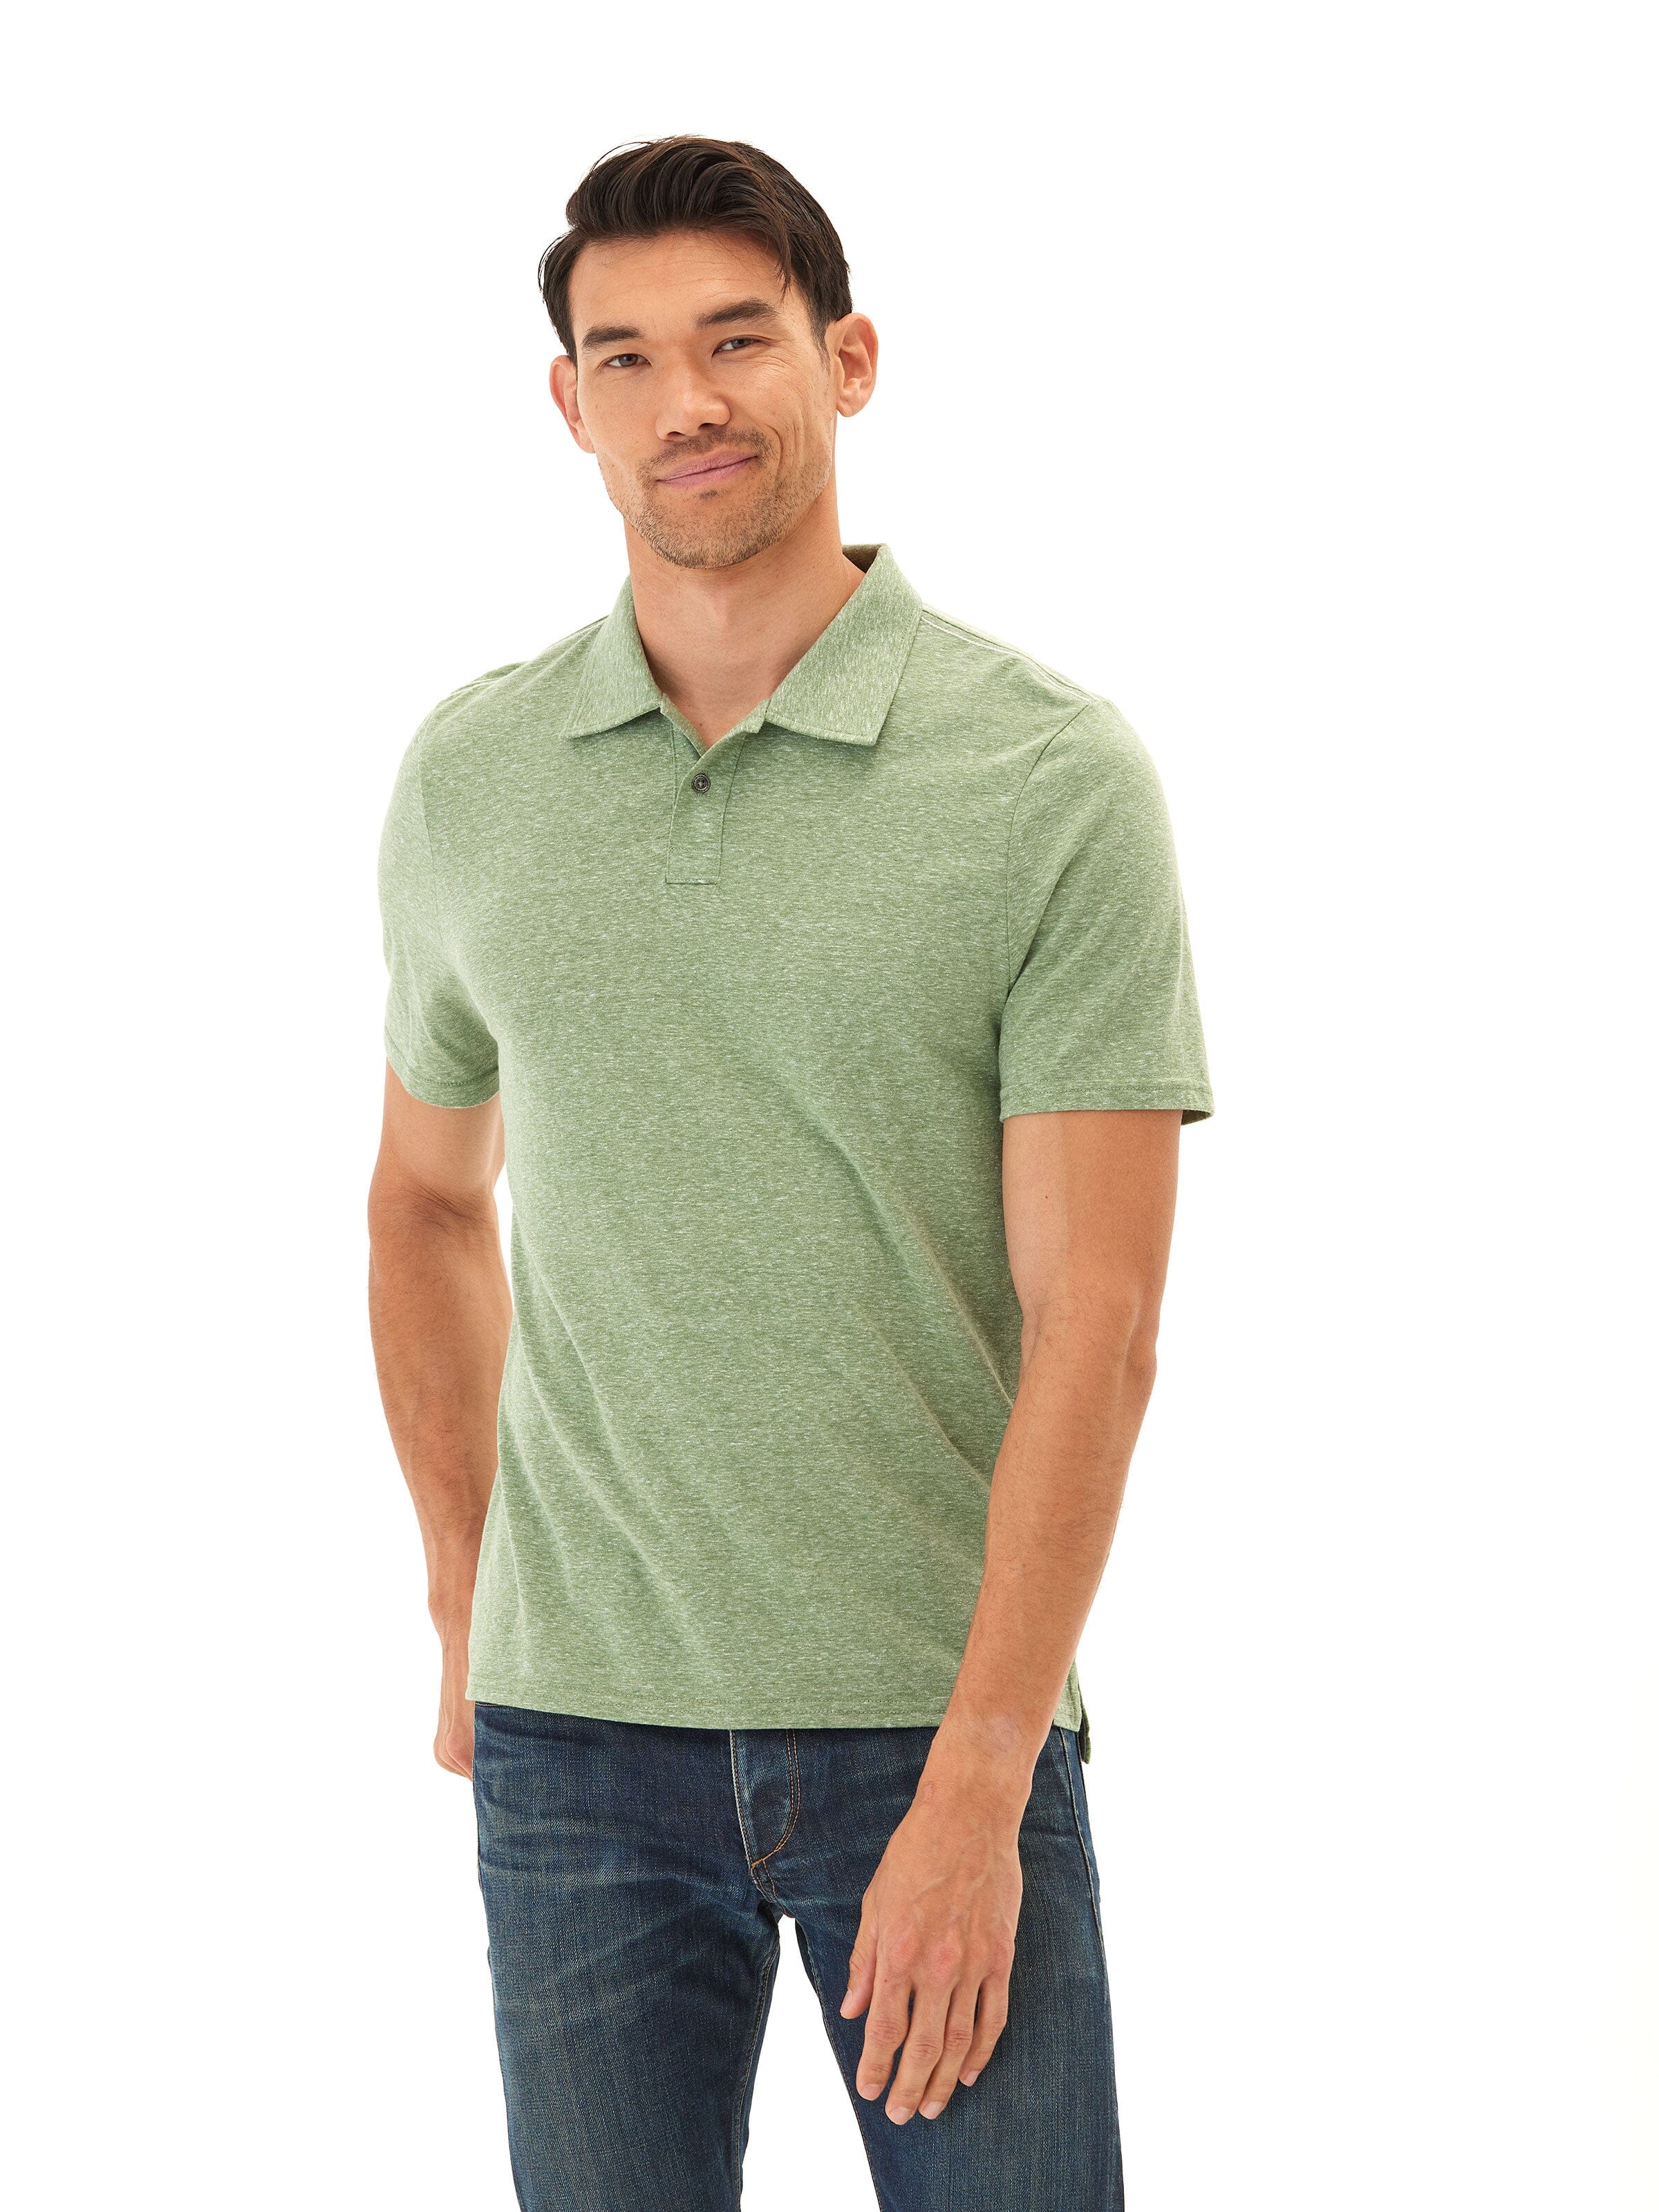 Baseline Triblend Jersey Polo Mens Tops Tshirt Short Polo Threads 4 Thought 